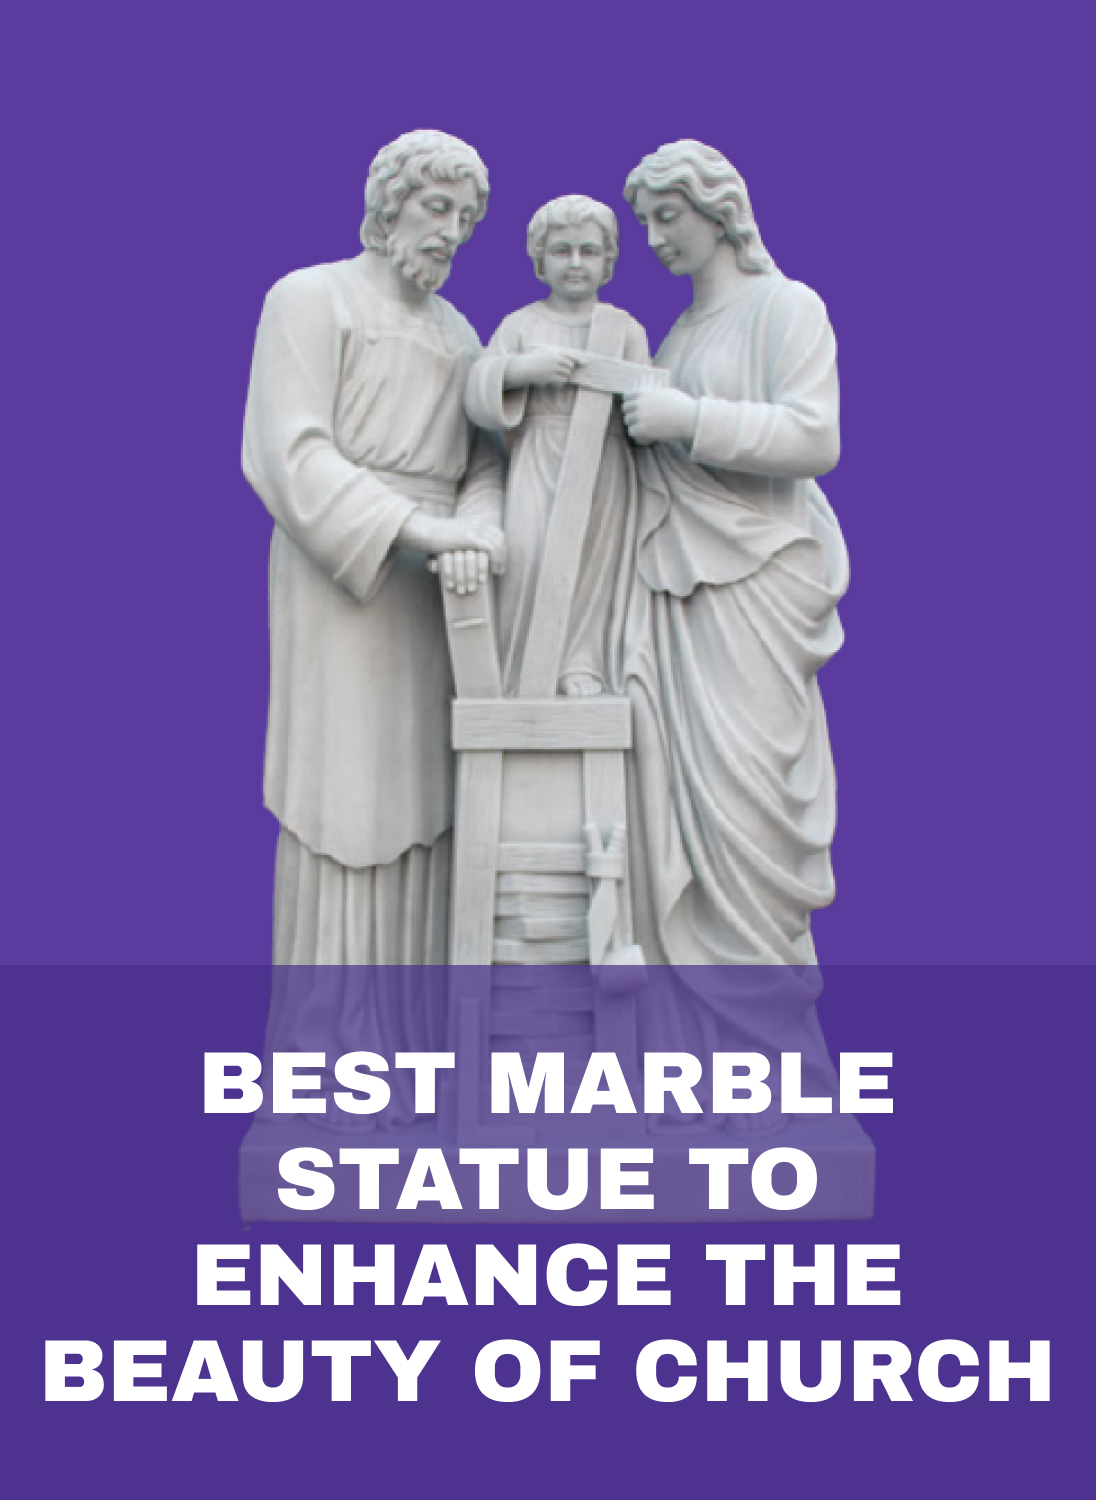 Best Marble Statues to Enhance the Beauty of Church